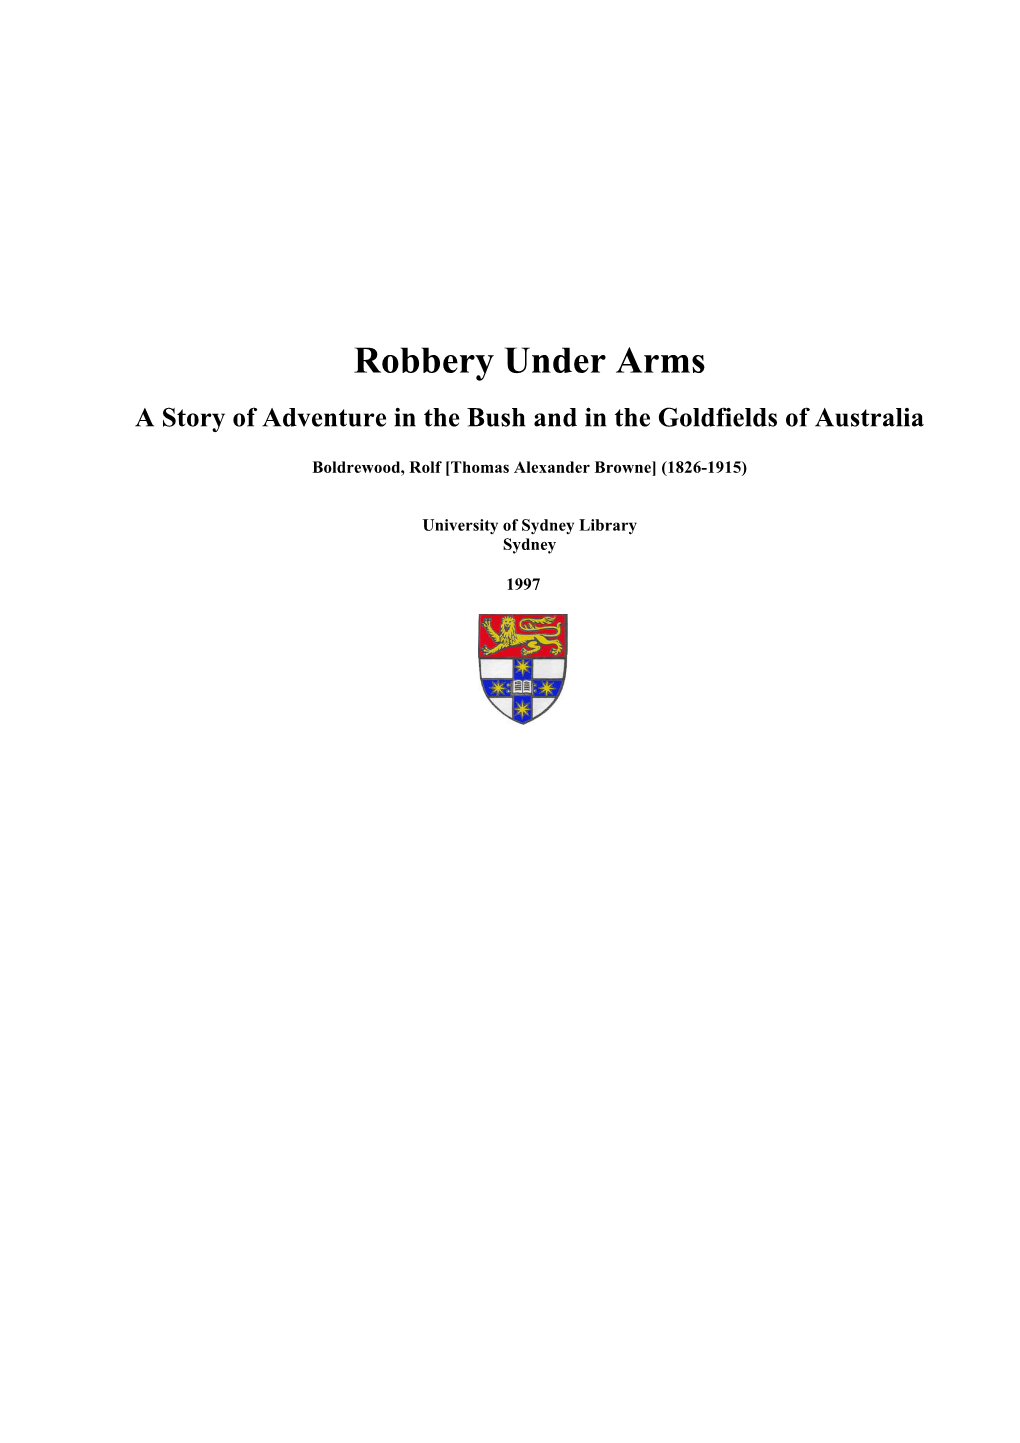 Robbery Under Arms a Story of Adventure in the Bush and in the Goldfields of Australia